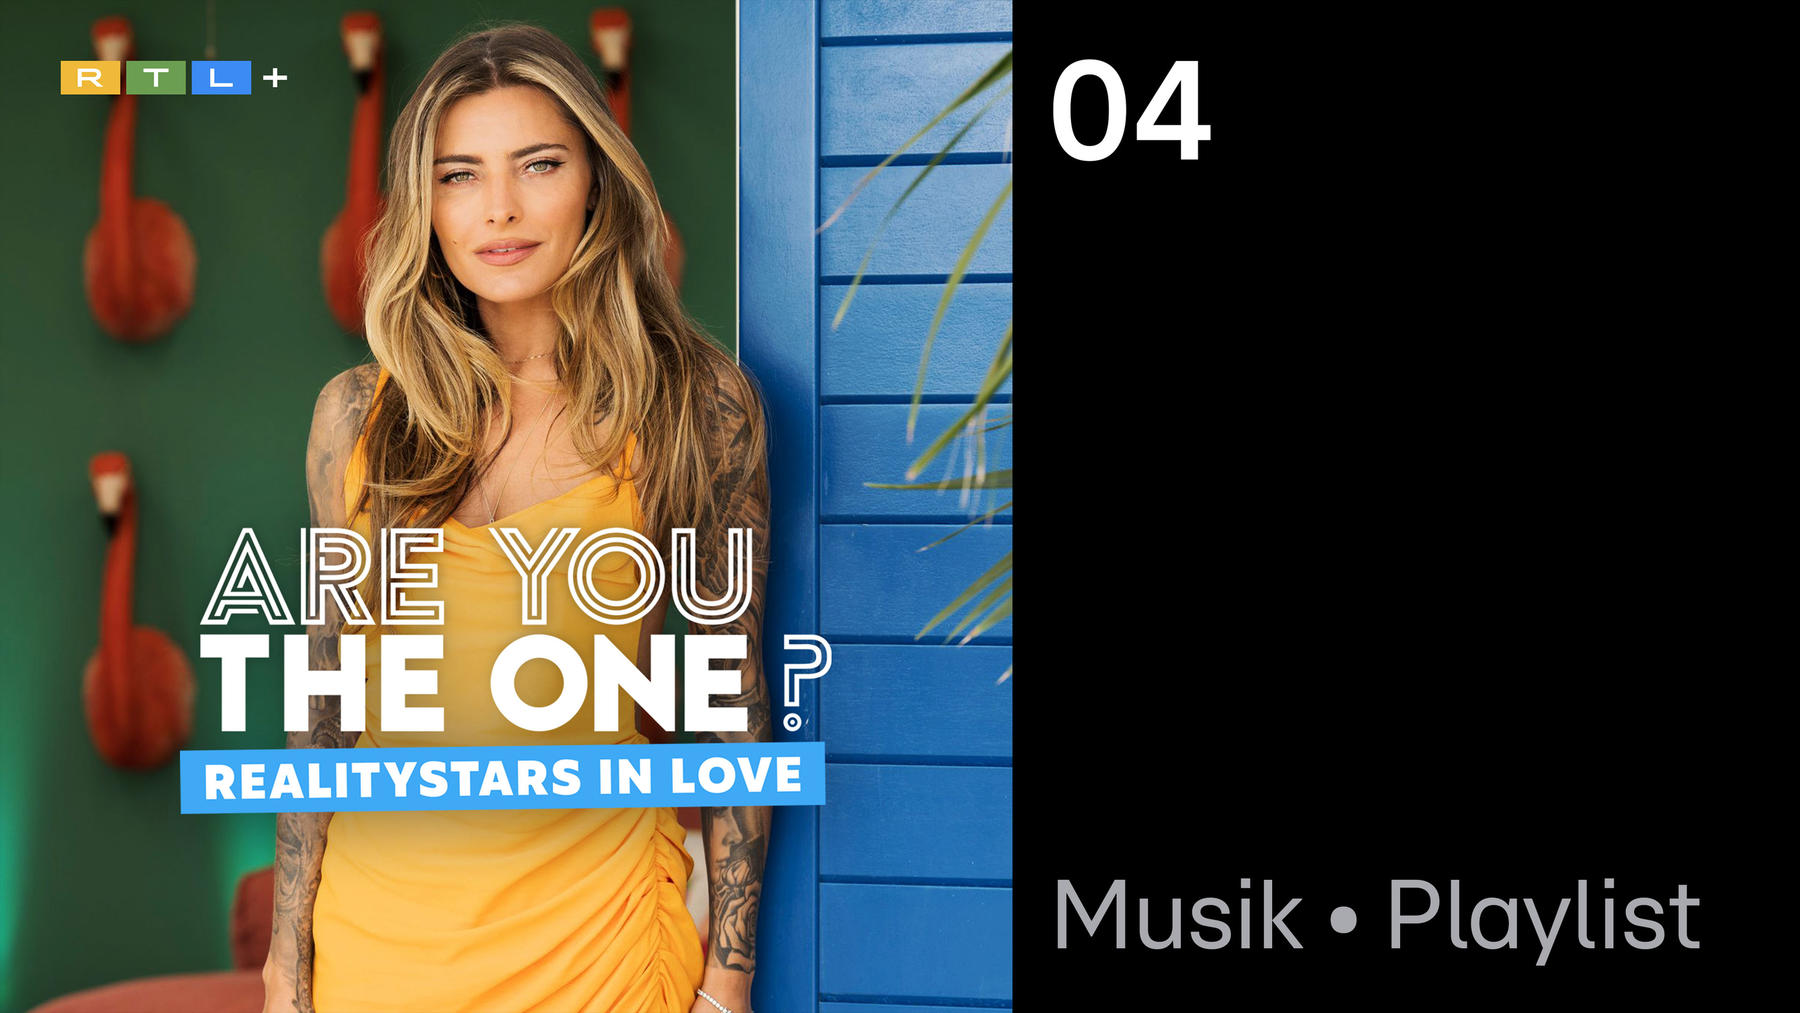 Are You The One? Realitystars in Love Playlist